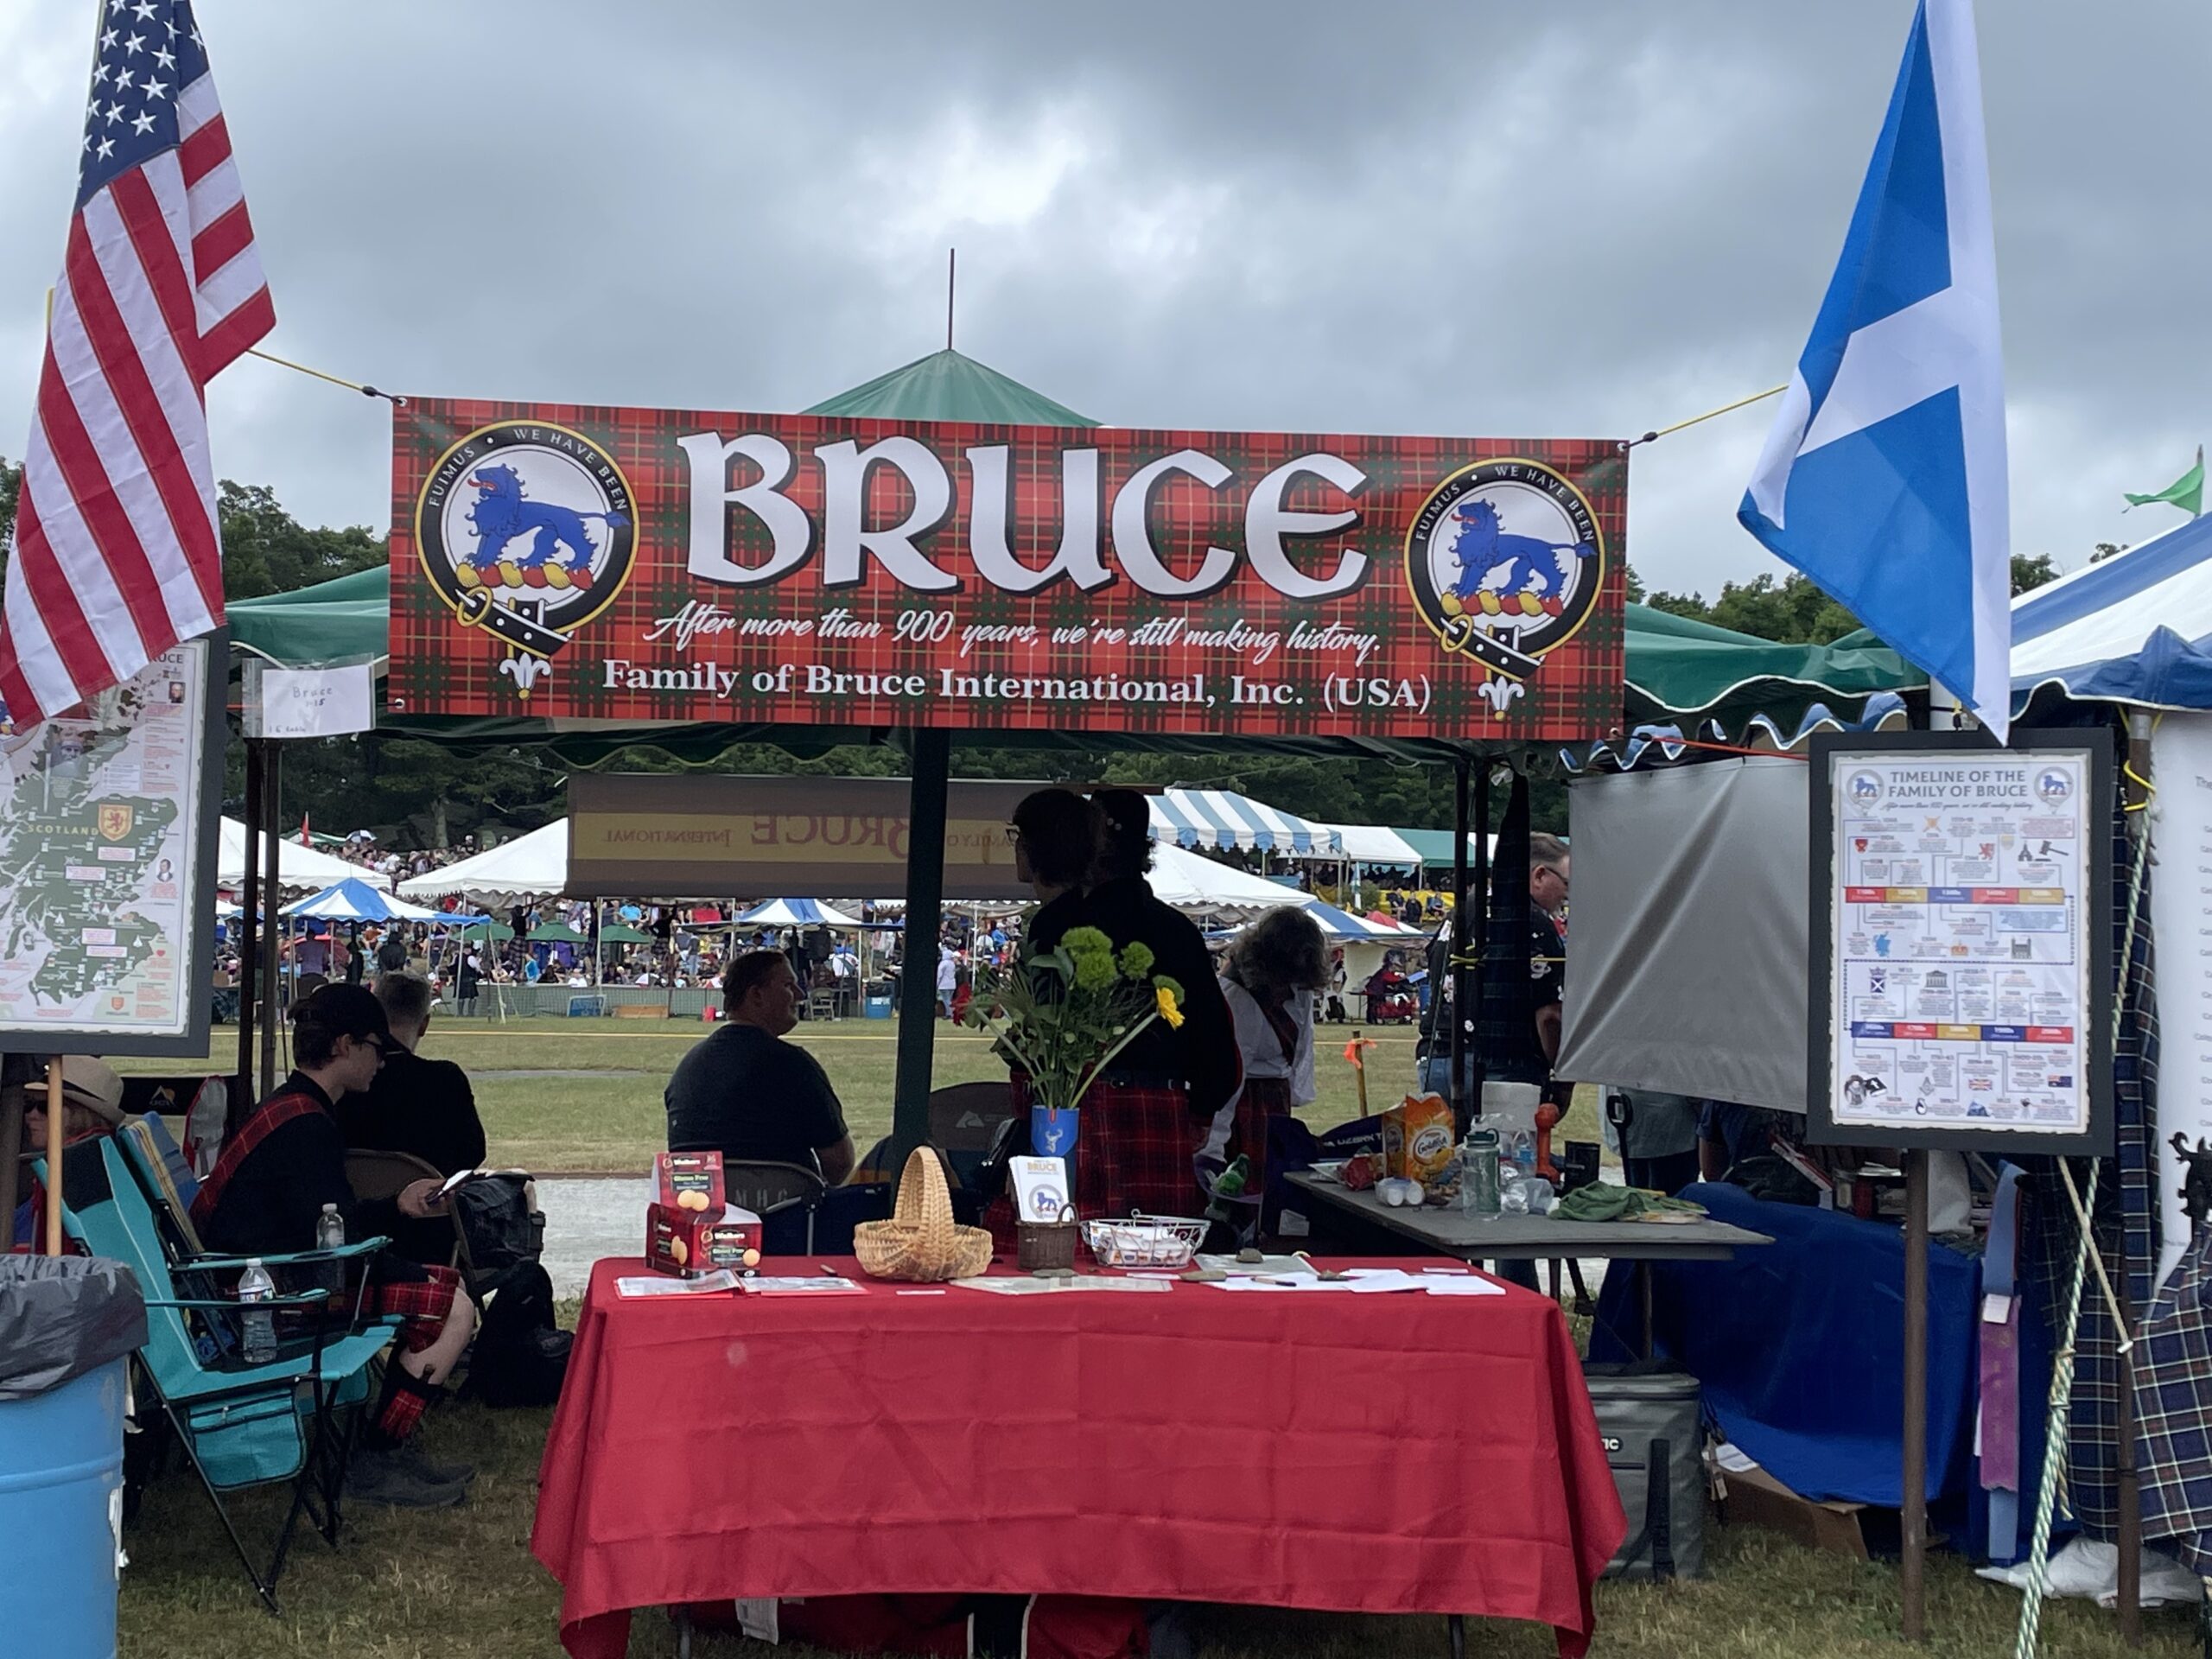 Bruce Clan Tent at Grandfather Mountain Highland Games